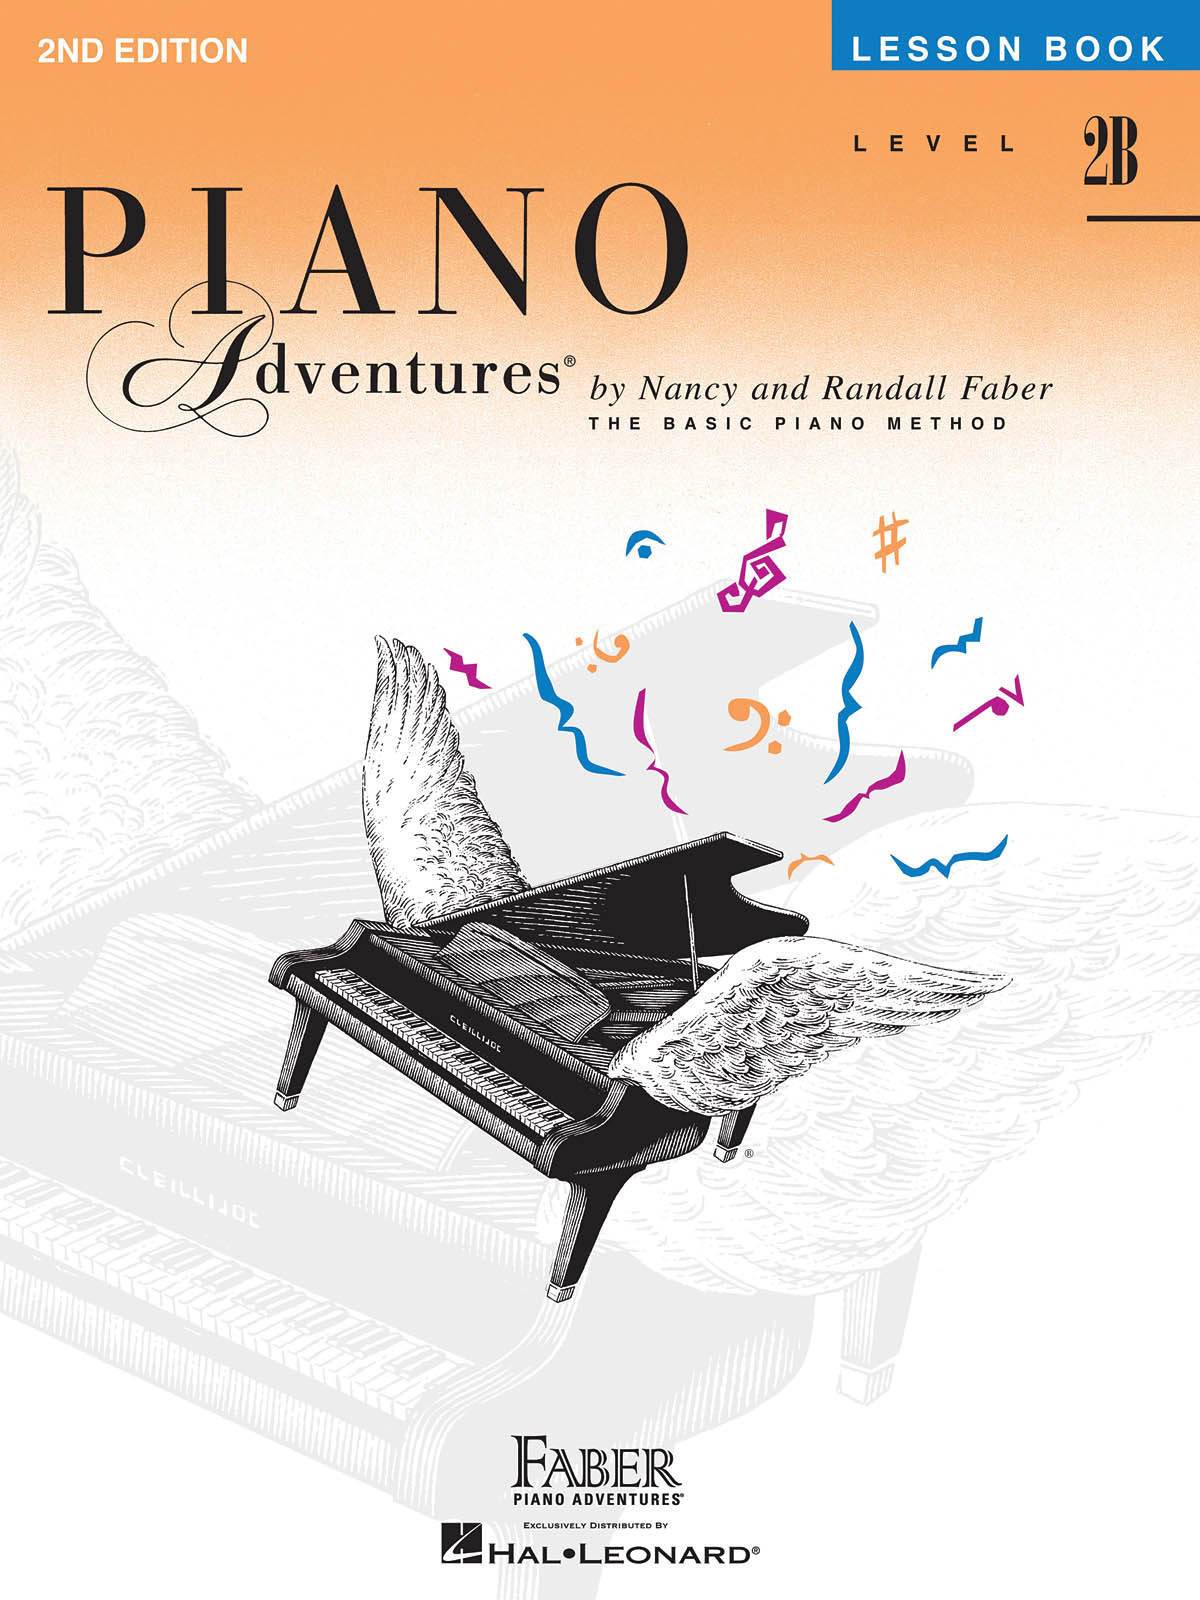 Piano Adventures Lesson Book Level 2B - 2nd Edition